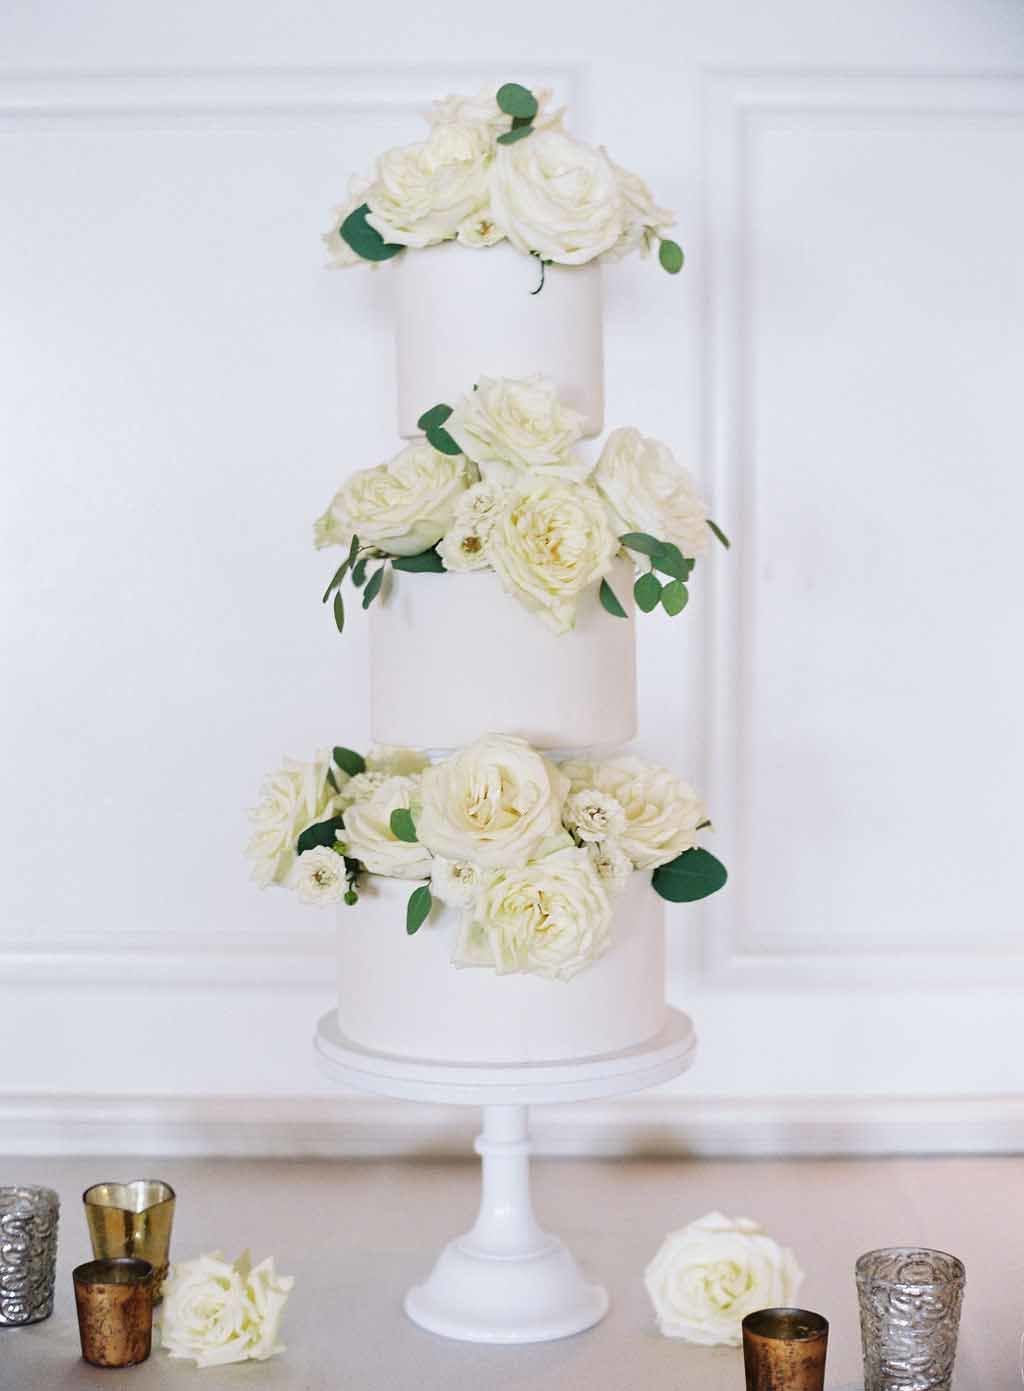 3 tiered white wedding cake with white roses